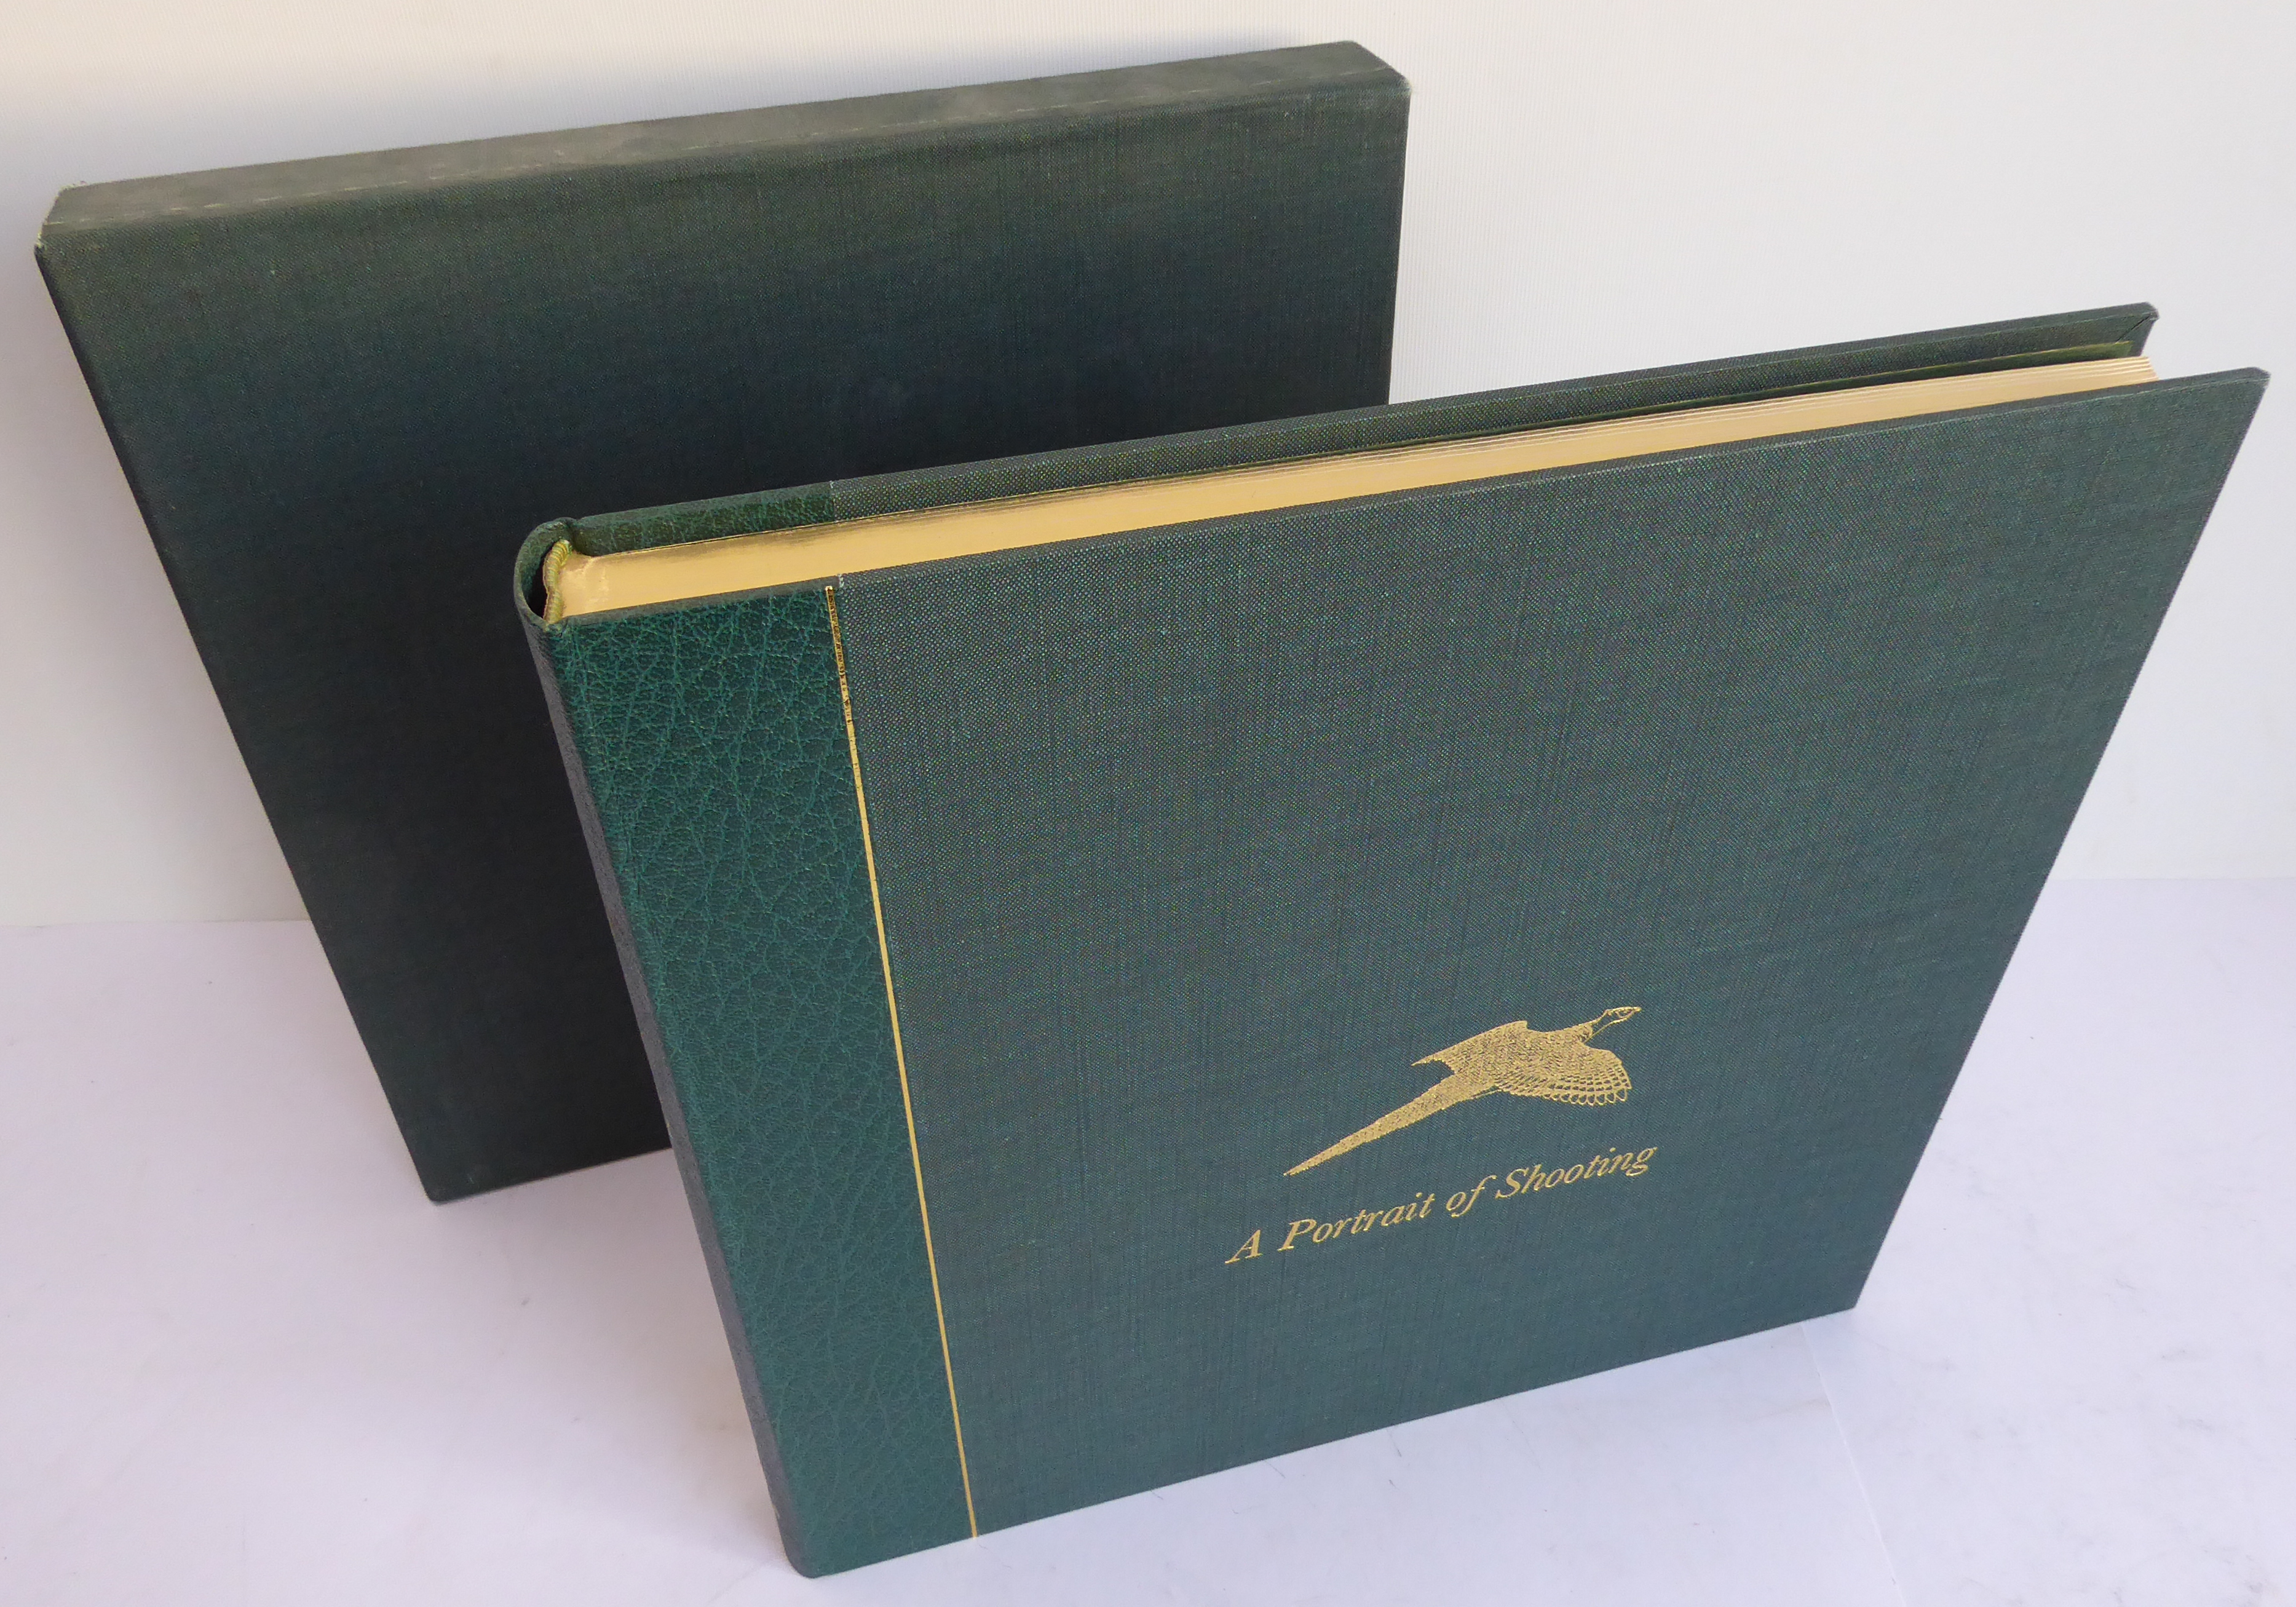 Four volumes on shooting and fishing: John Marchington - 'A Portrait of Shooting' (Antony Atha 1979, - Image 5 of 11